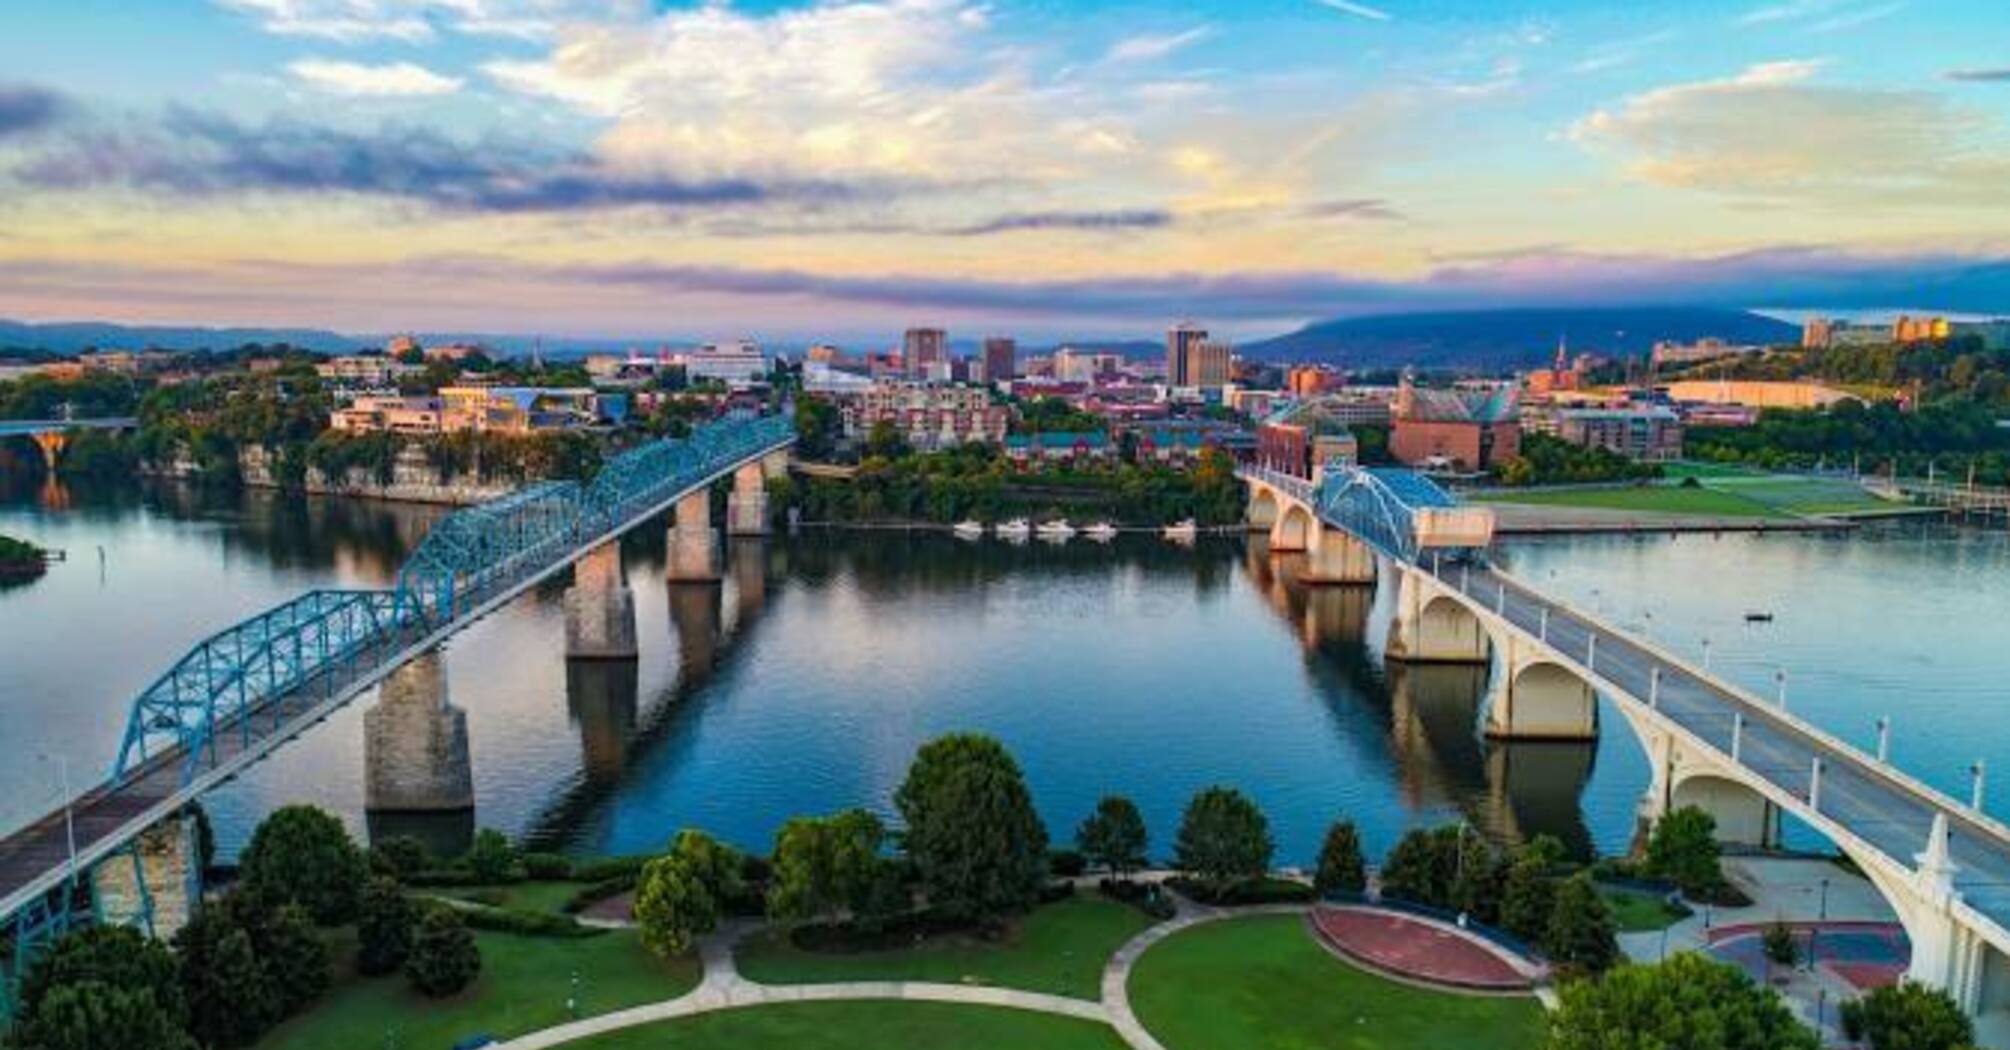 The best things to do in Chattanooga